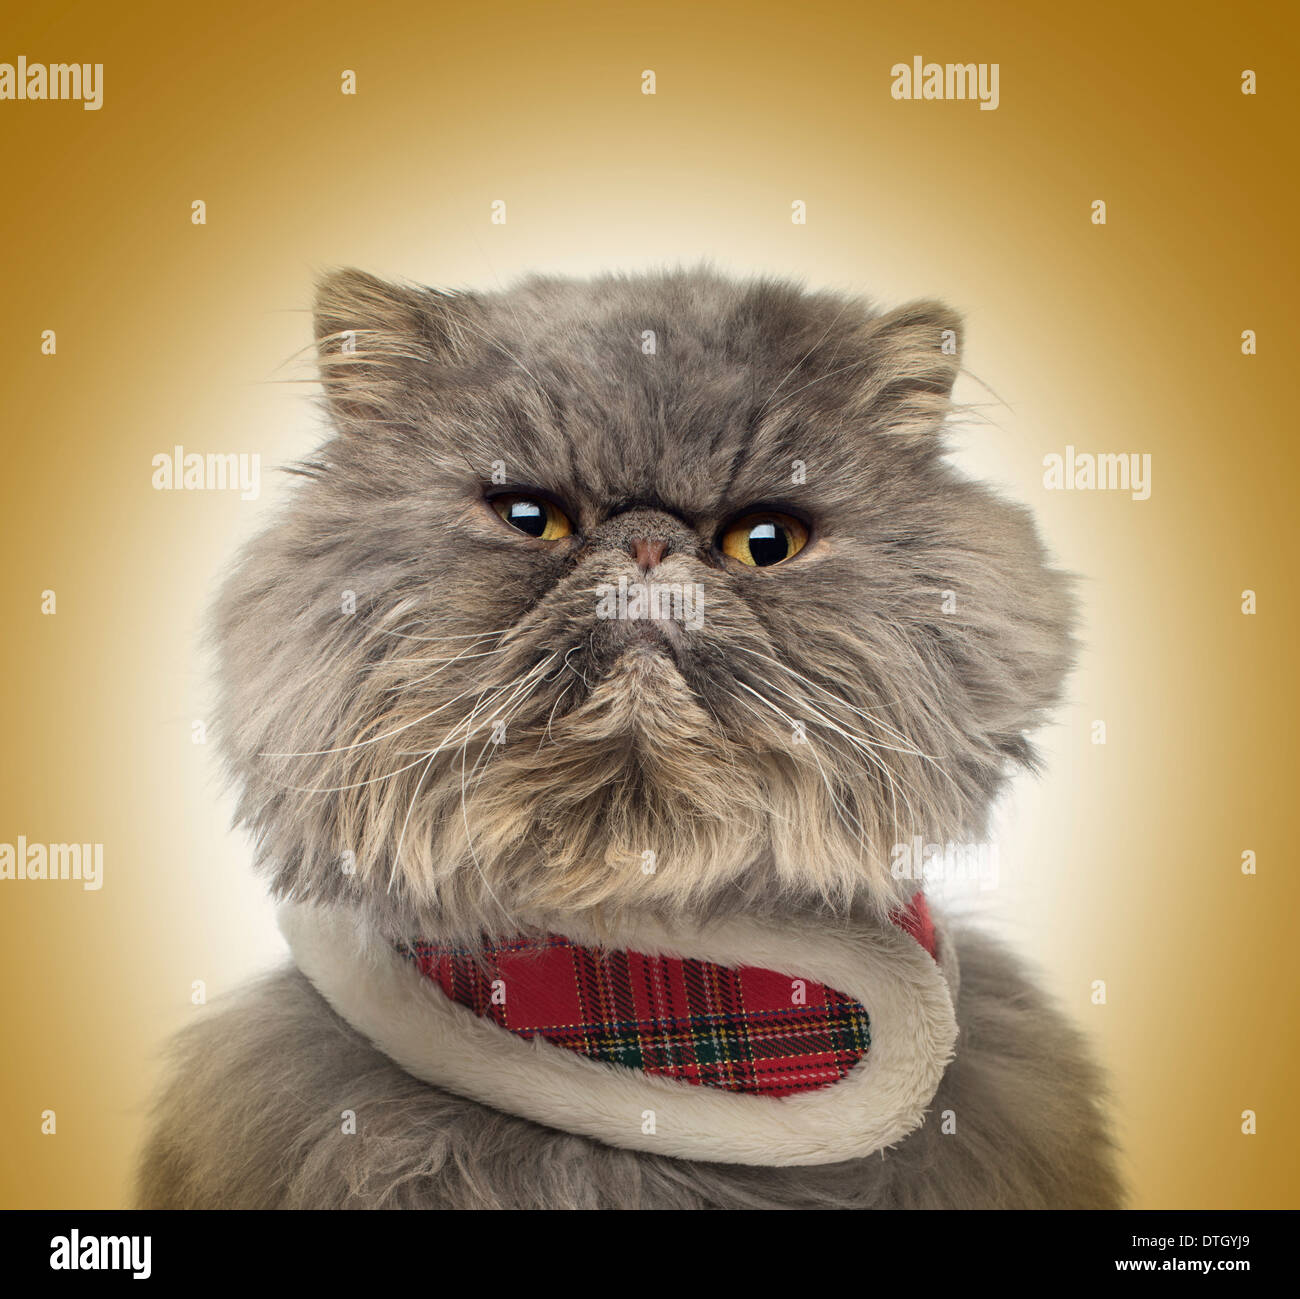 Front view of a grumpy Persian cat wearing a tartan harness, on a golden background Stock Photo